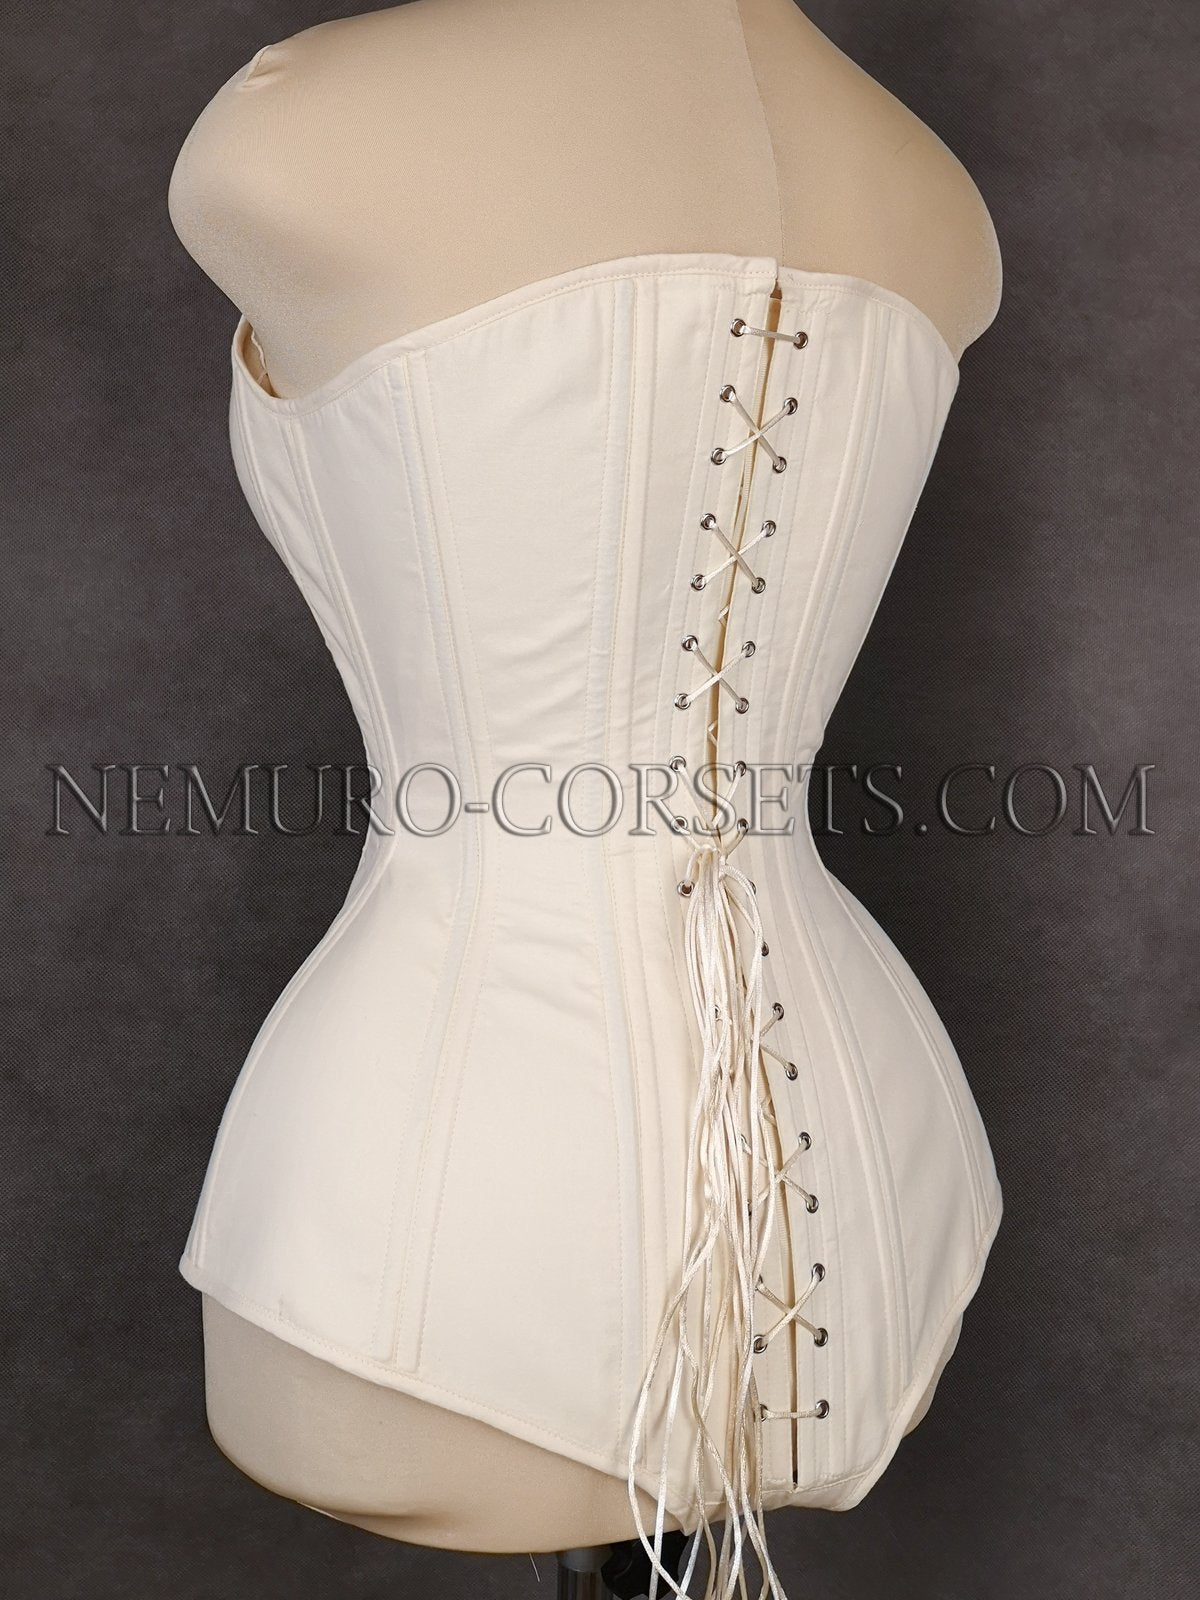 How to order a bespoke corset + reviews